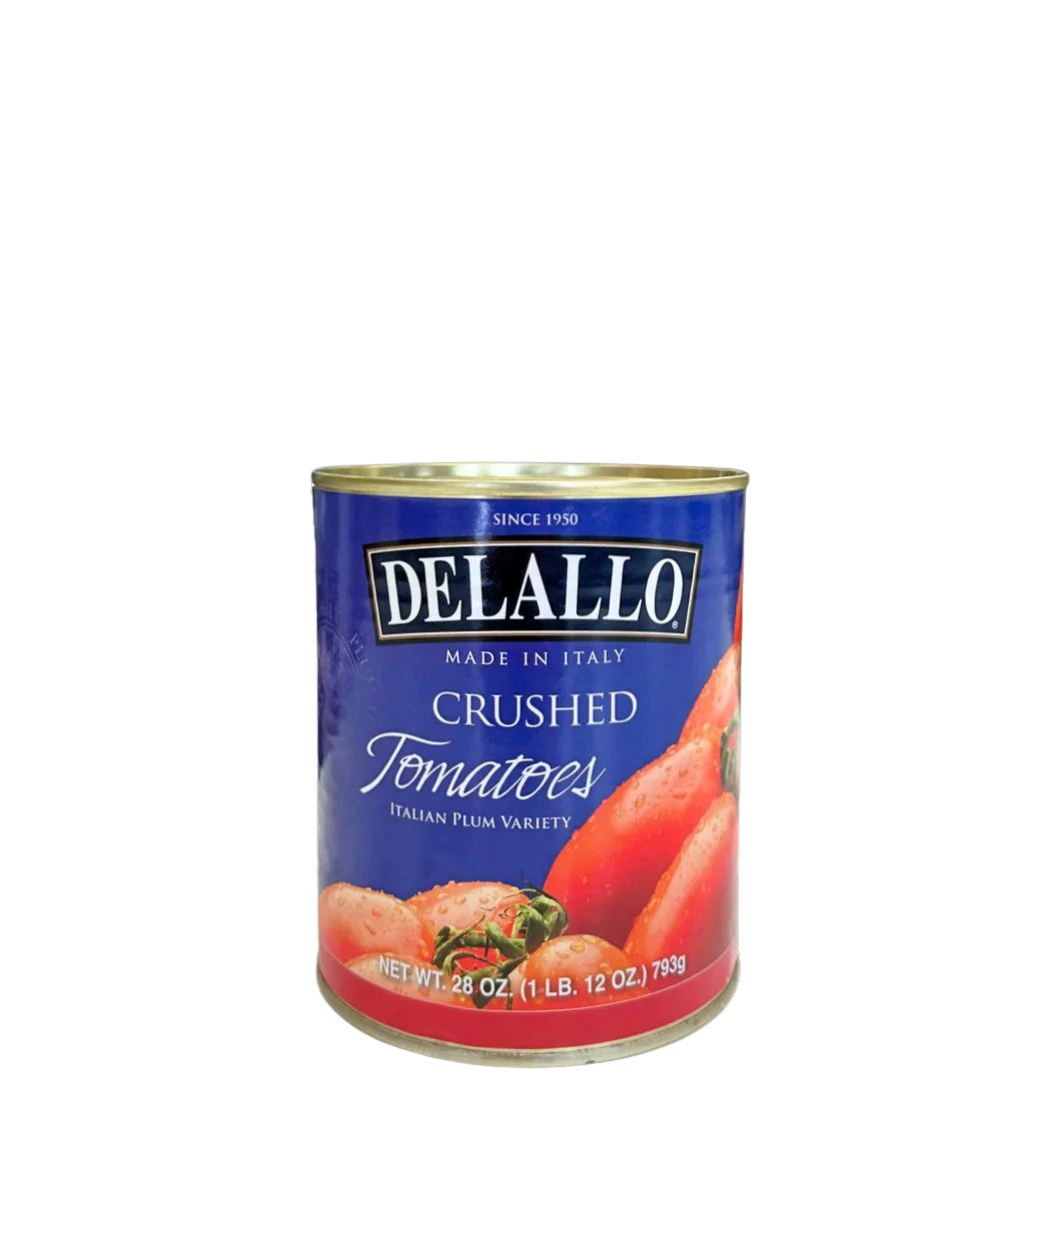 CANNED CRUSHED TOMATOES